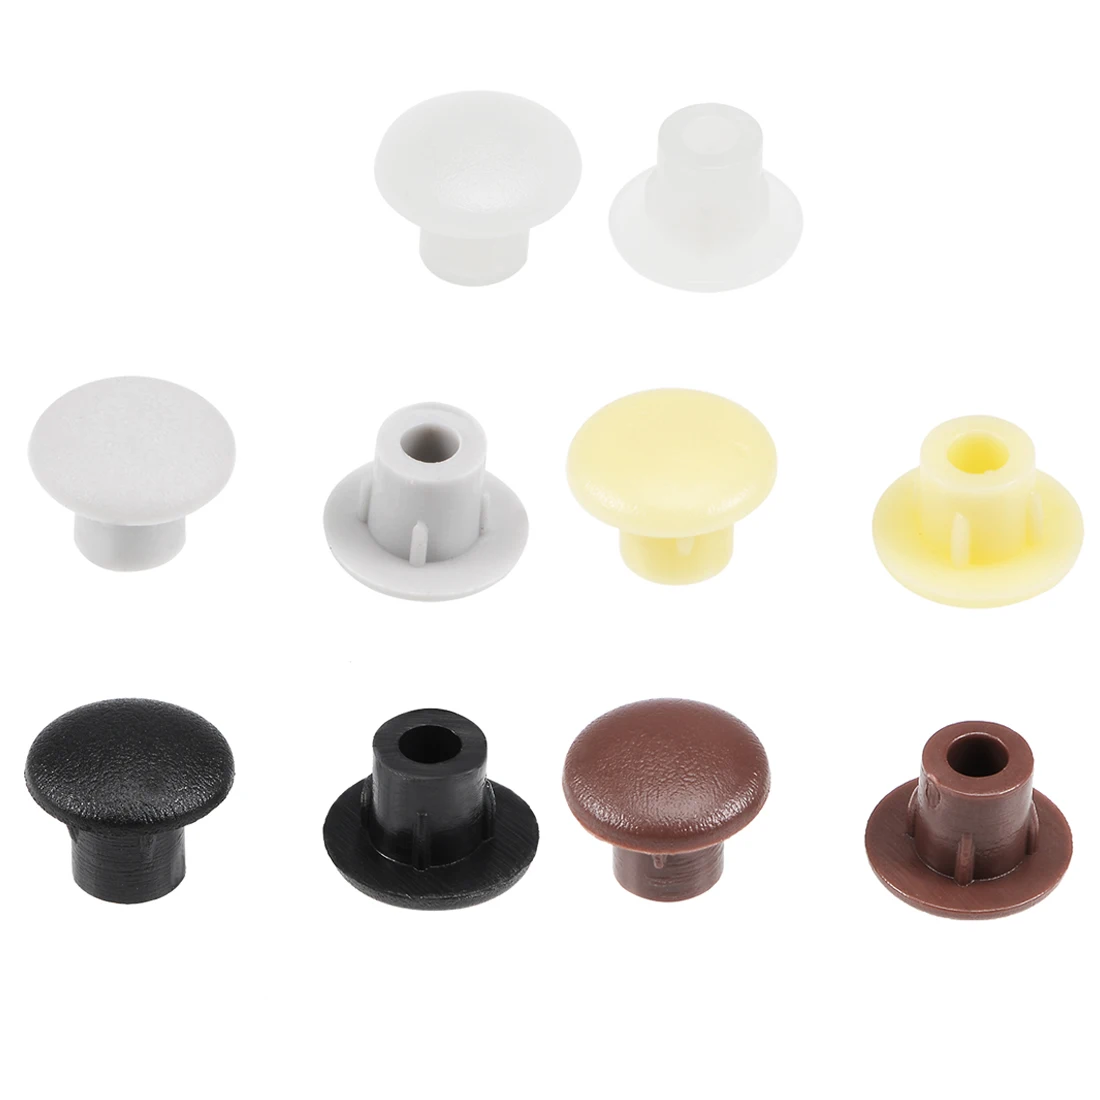 Details about   50Pcs Plastic Hole Plug End Cap Snap-Type Pressure Cover for Furniture Tube Hole 